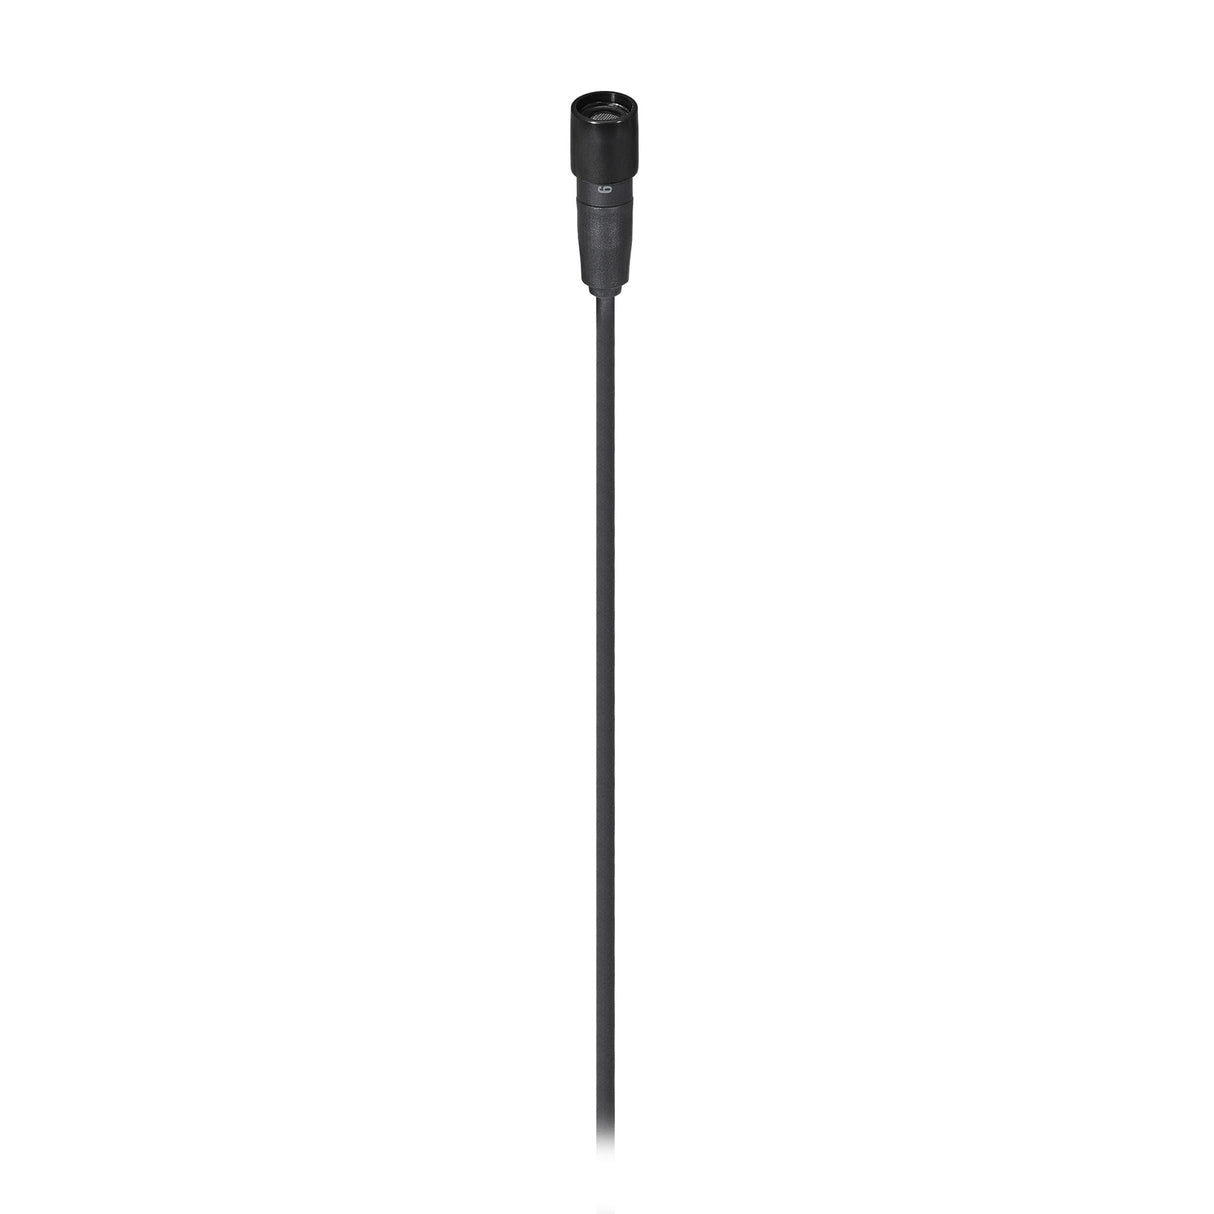 Audio-Technica BP899LcT4 Omnidirectional Condenser Lavalier Microphone, Low Sensitivity, TA4F Connector